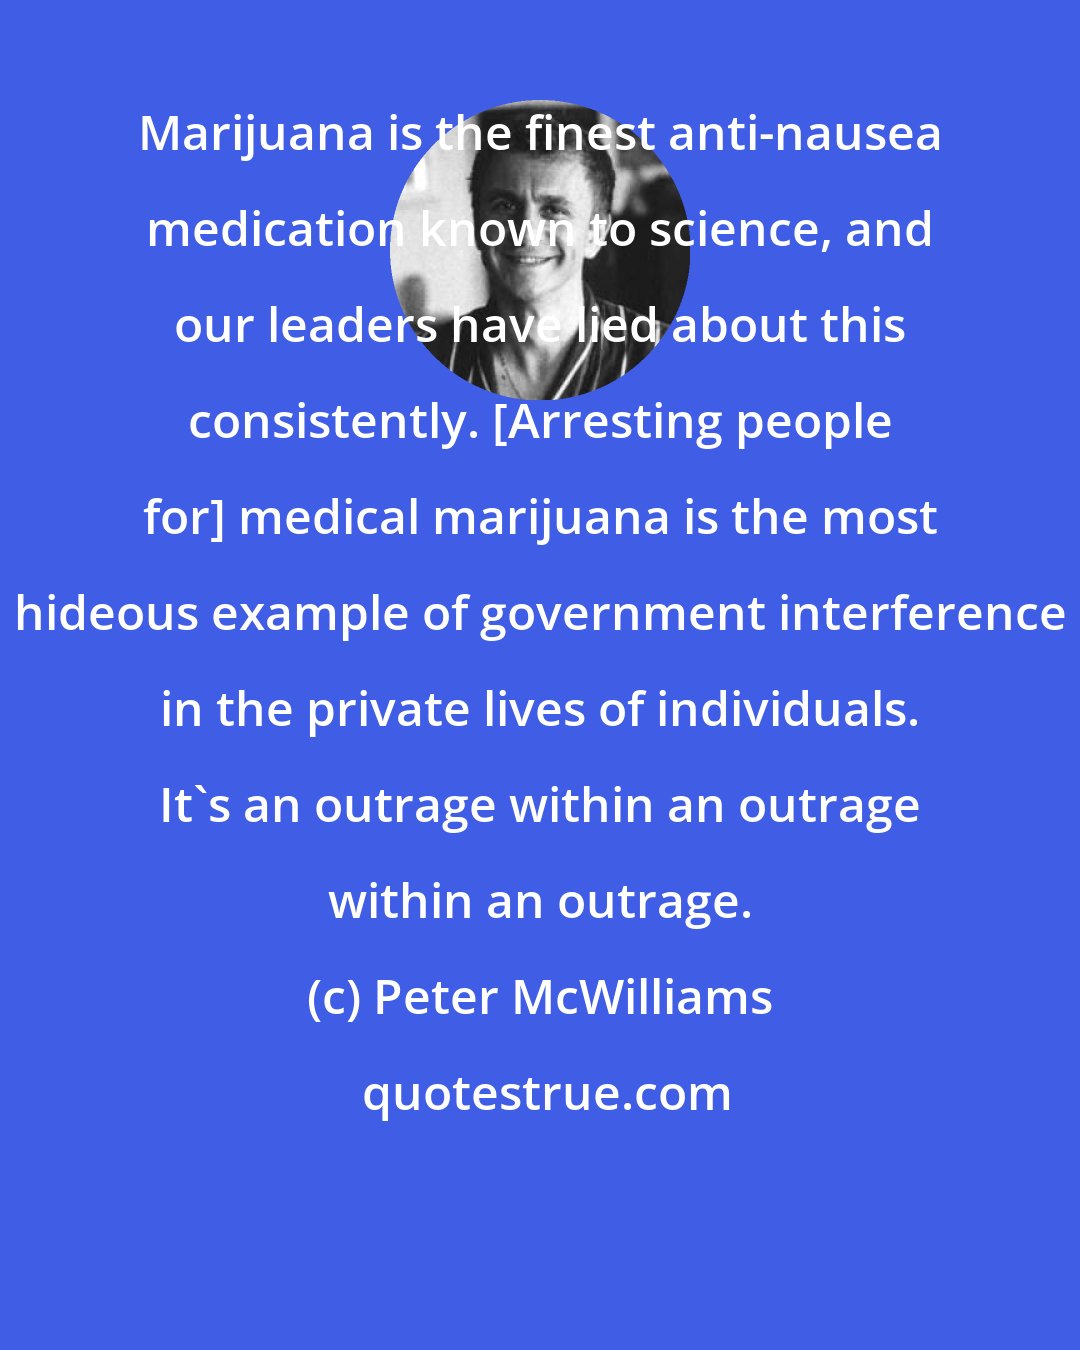 Peter McWilliams: Marijuana is the finest anti-nausea medication known to science, and our leaders have lied about this consistently. [Arresting people for] medical marijuana is the most hideous example of government interference in the private lives of individuals. It's an outrage within an outrage within an outrage.